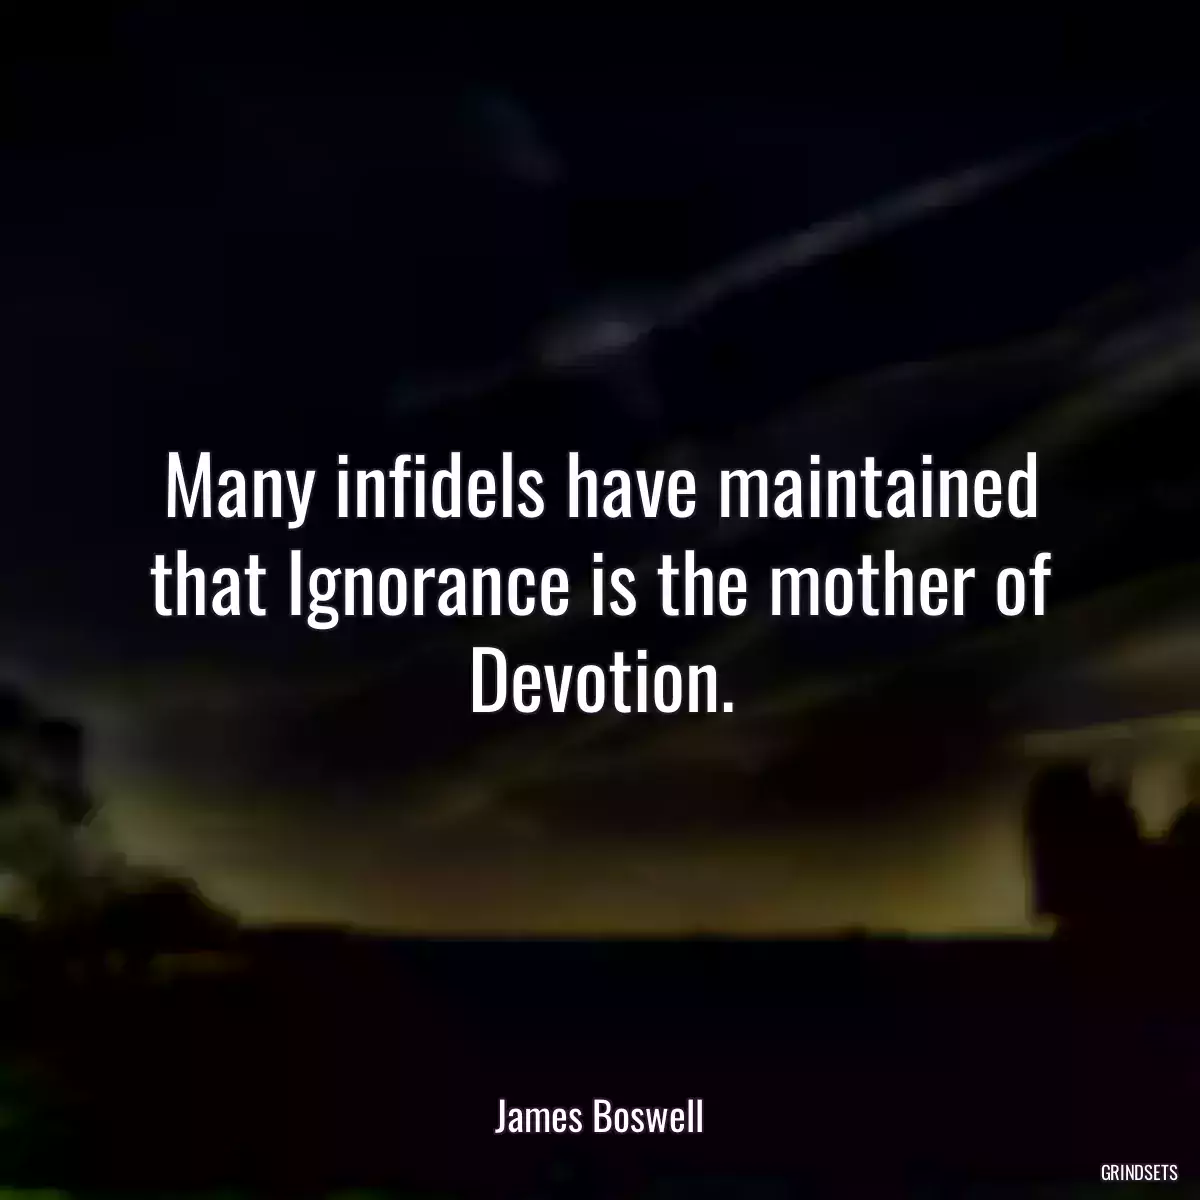 Many infidels have maintained that Ignorance is the mother of Devotion.